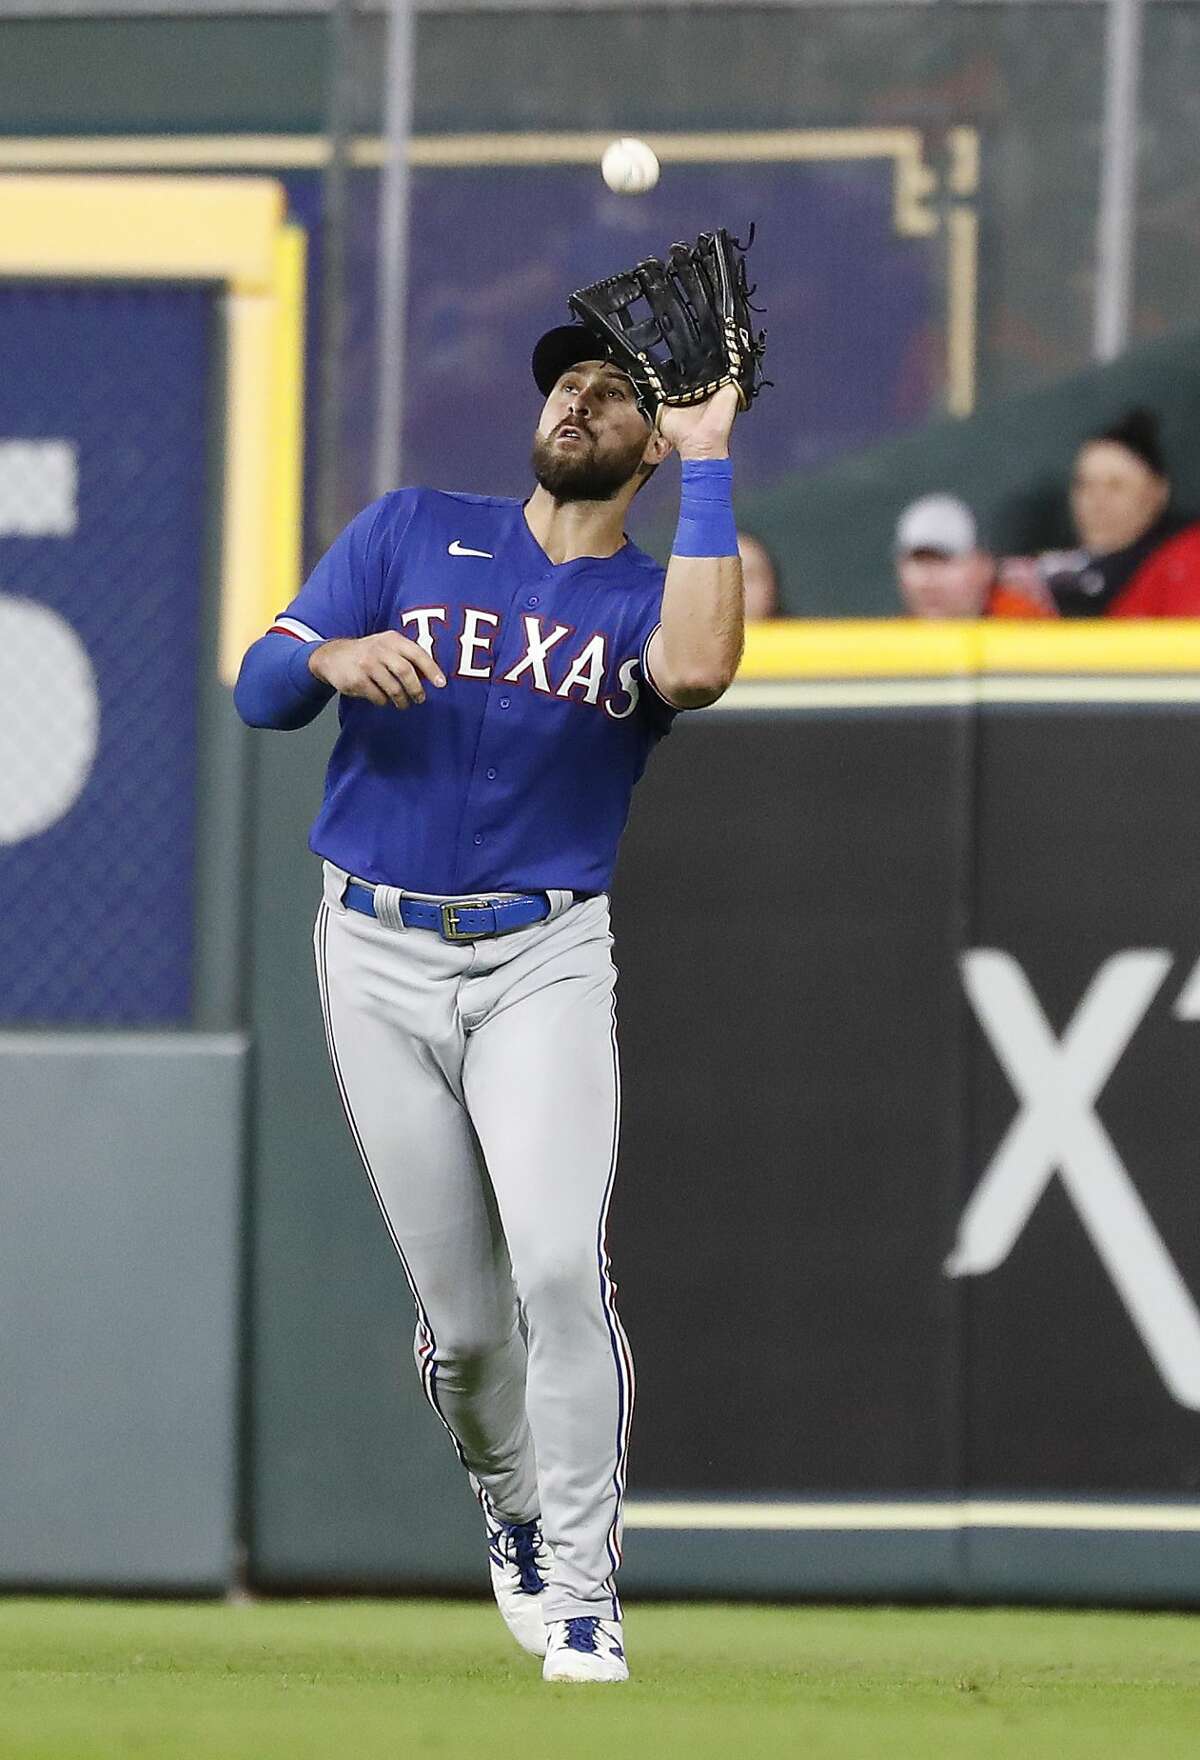 Myles Straw's game plan vs. Astros: 'Just a Red Bull and then play